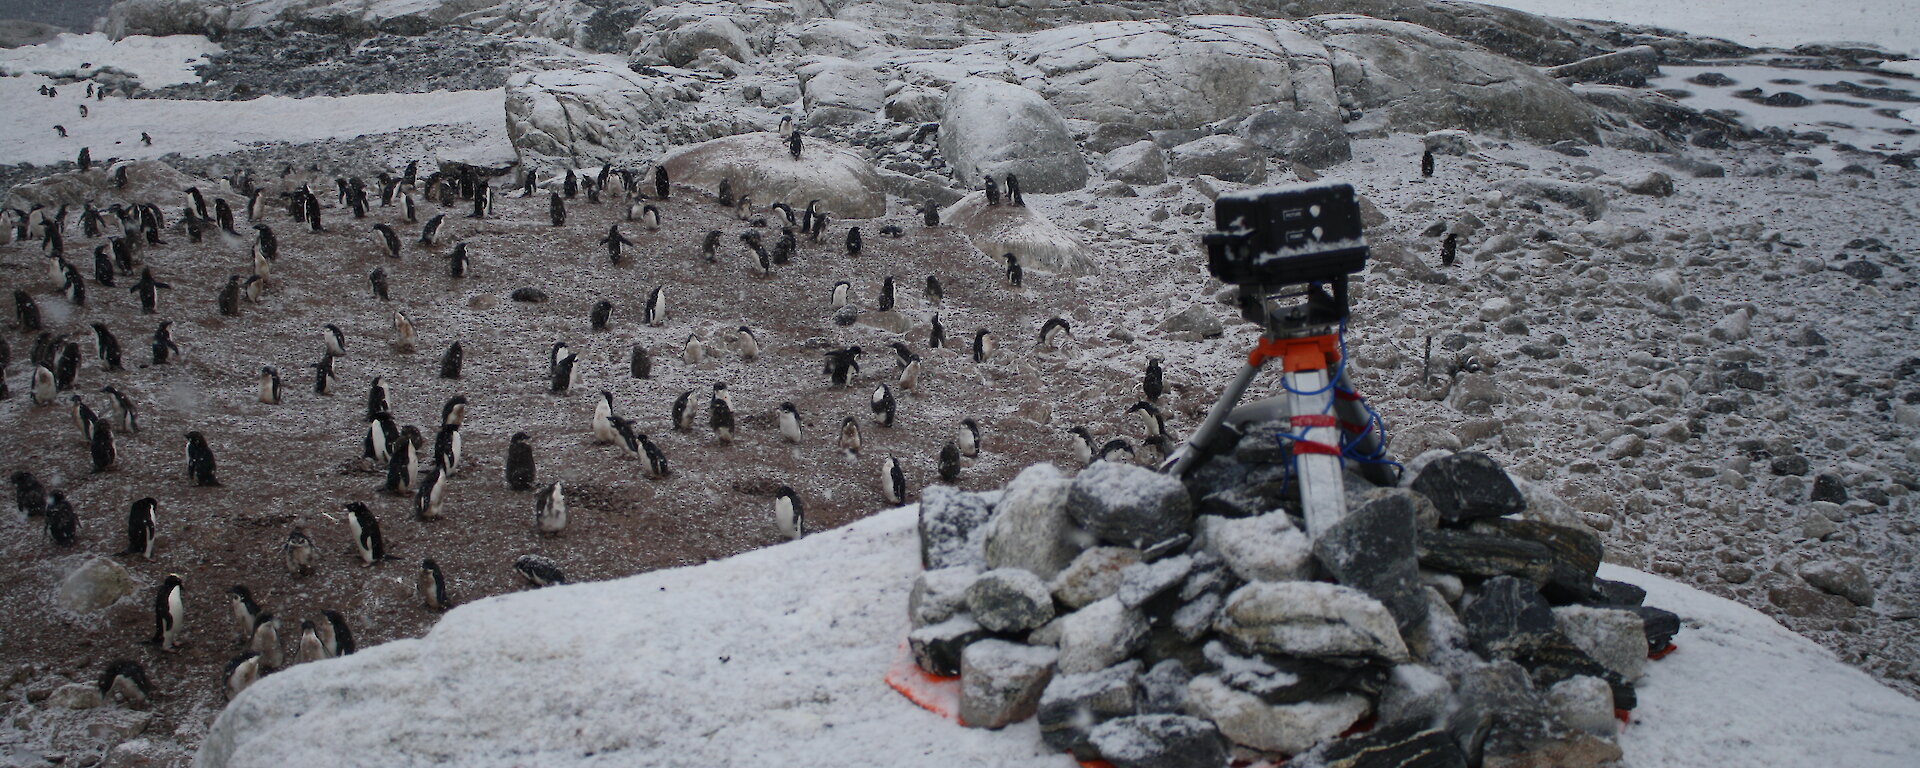 An automated camera sits on top of rocks overlooking an Adelie penguin colony near Australia’s Casey station.